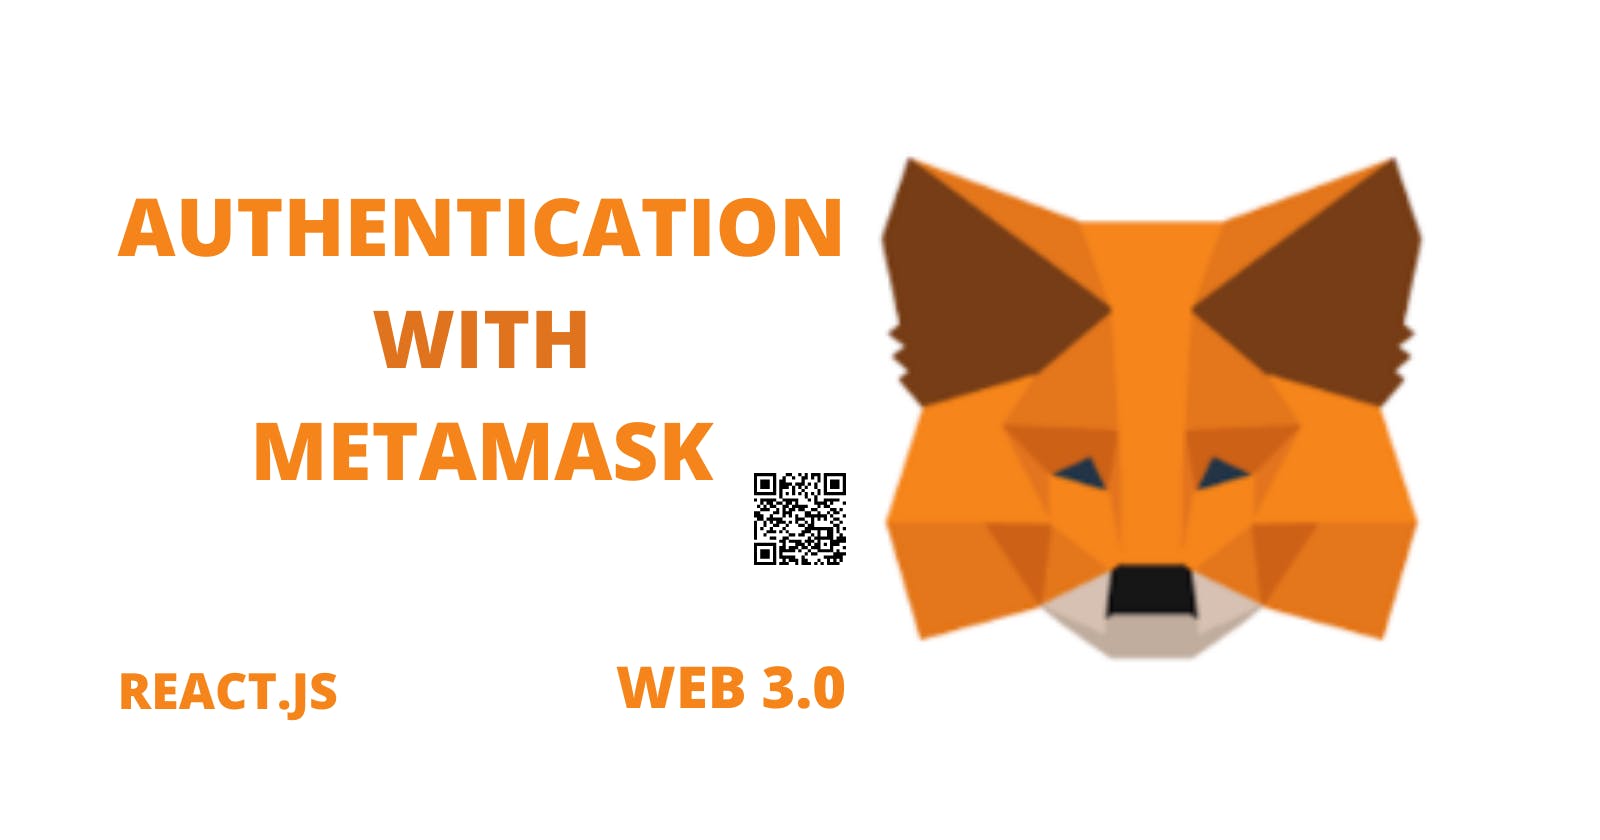 web3.0 : Authentication with MetaMask on React